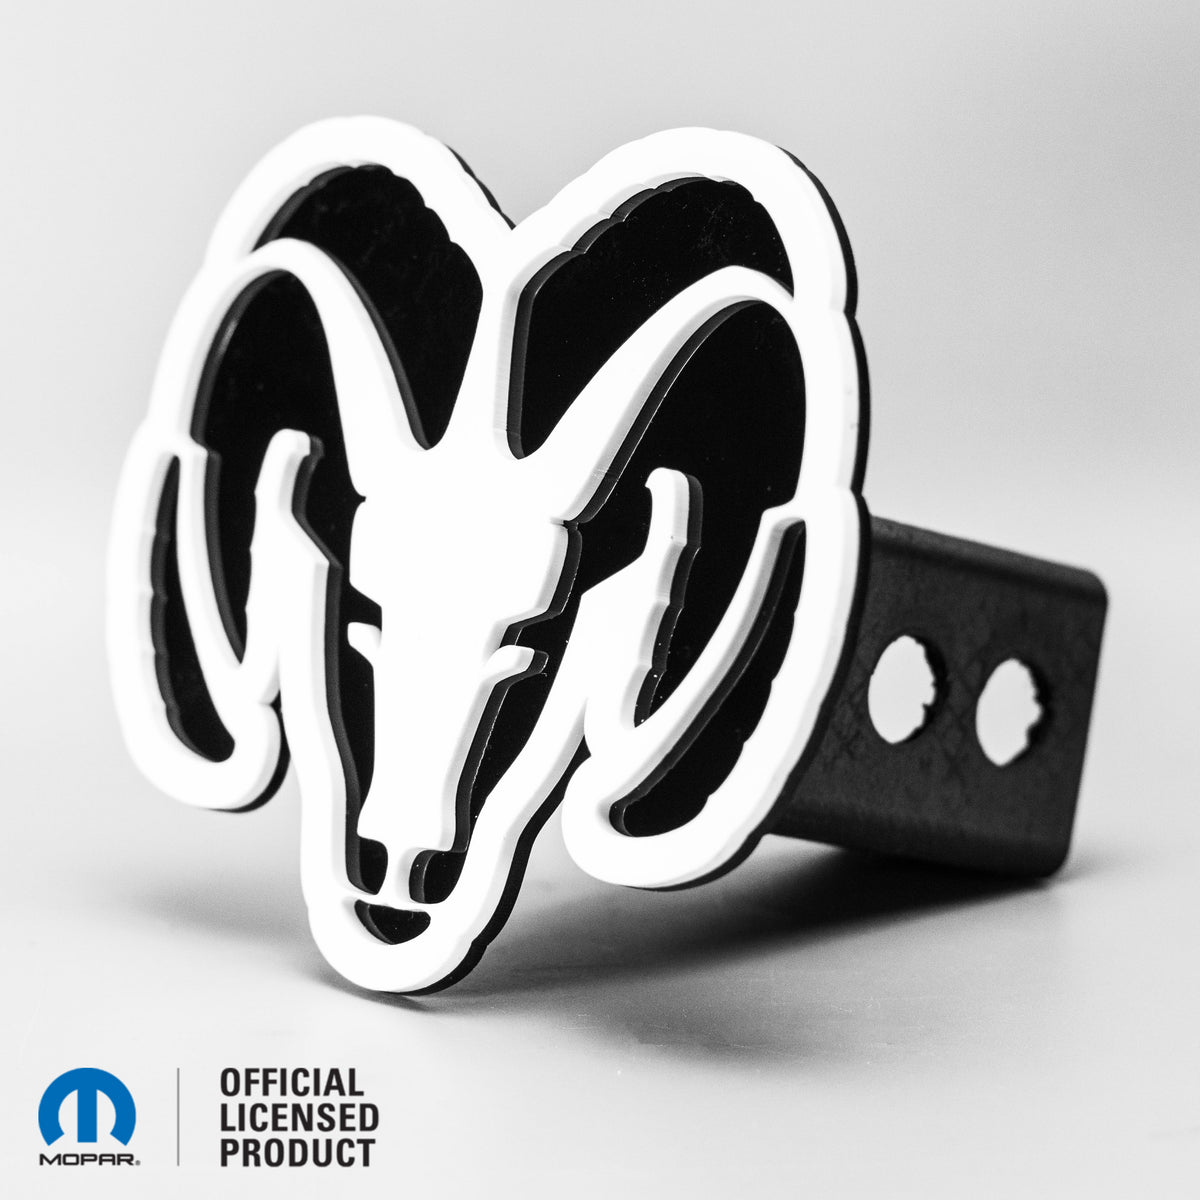 RAM® HEAD LOGO STYLE 2 - HITCH COVER - White on Gloss - Officially Licensed Product